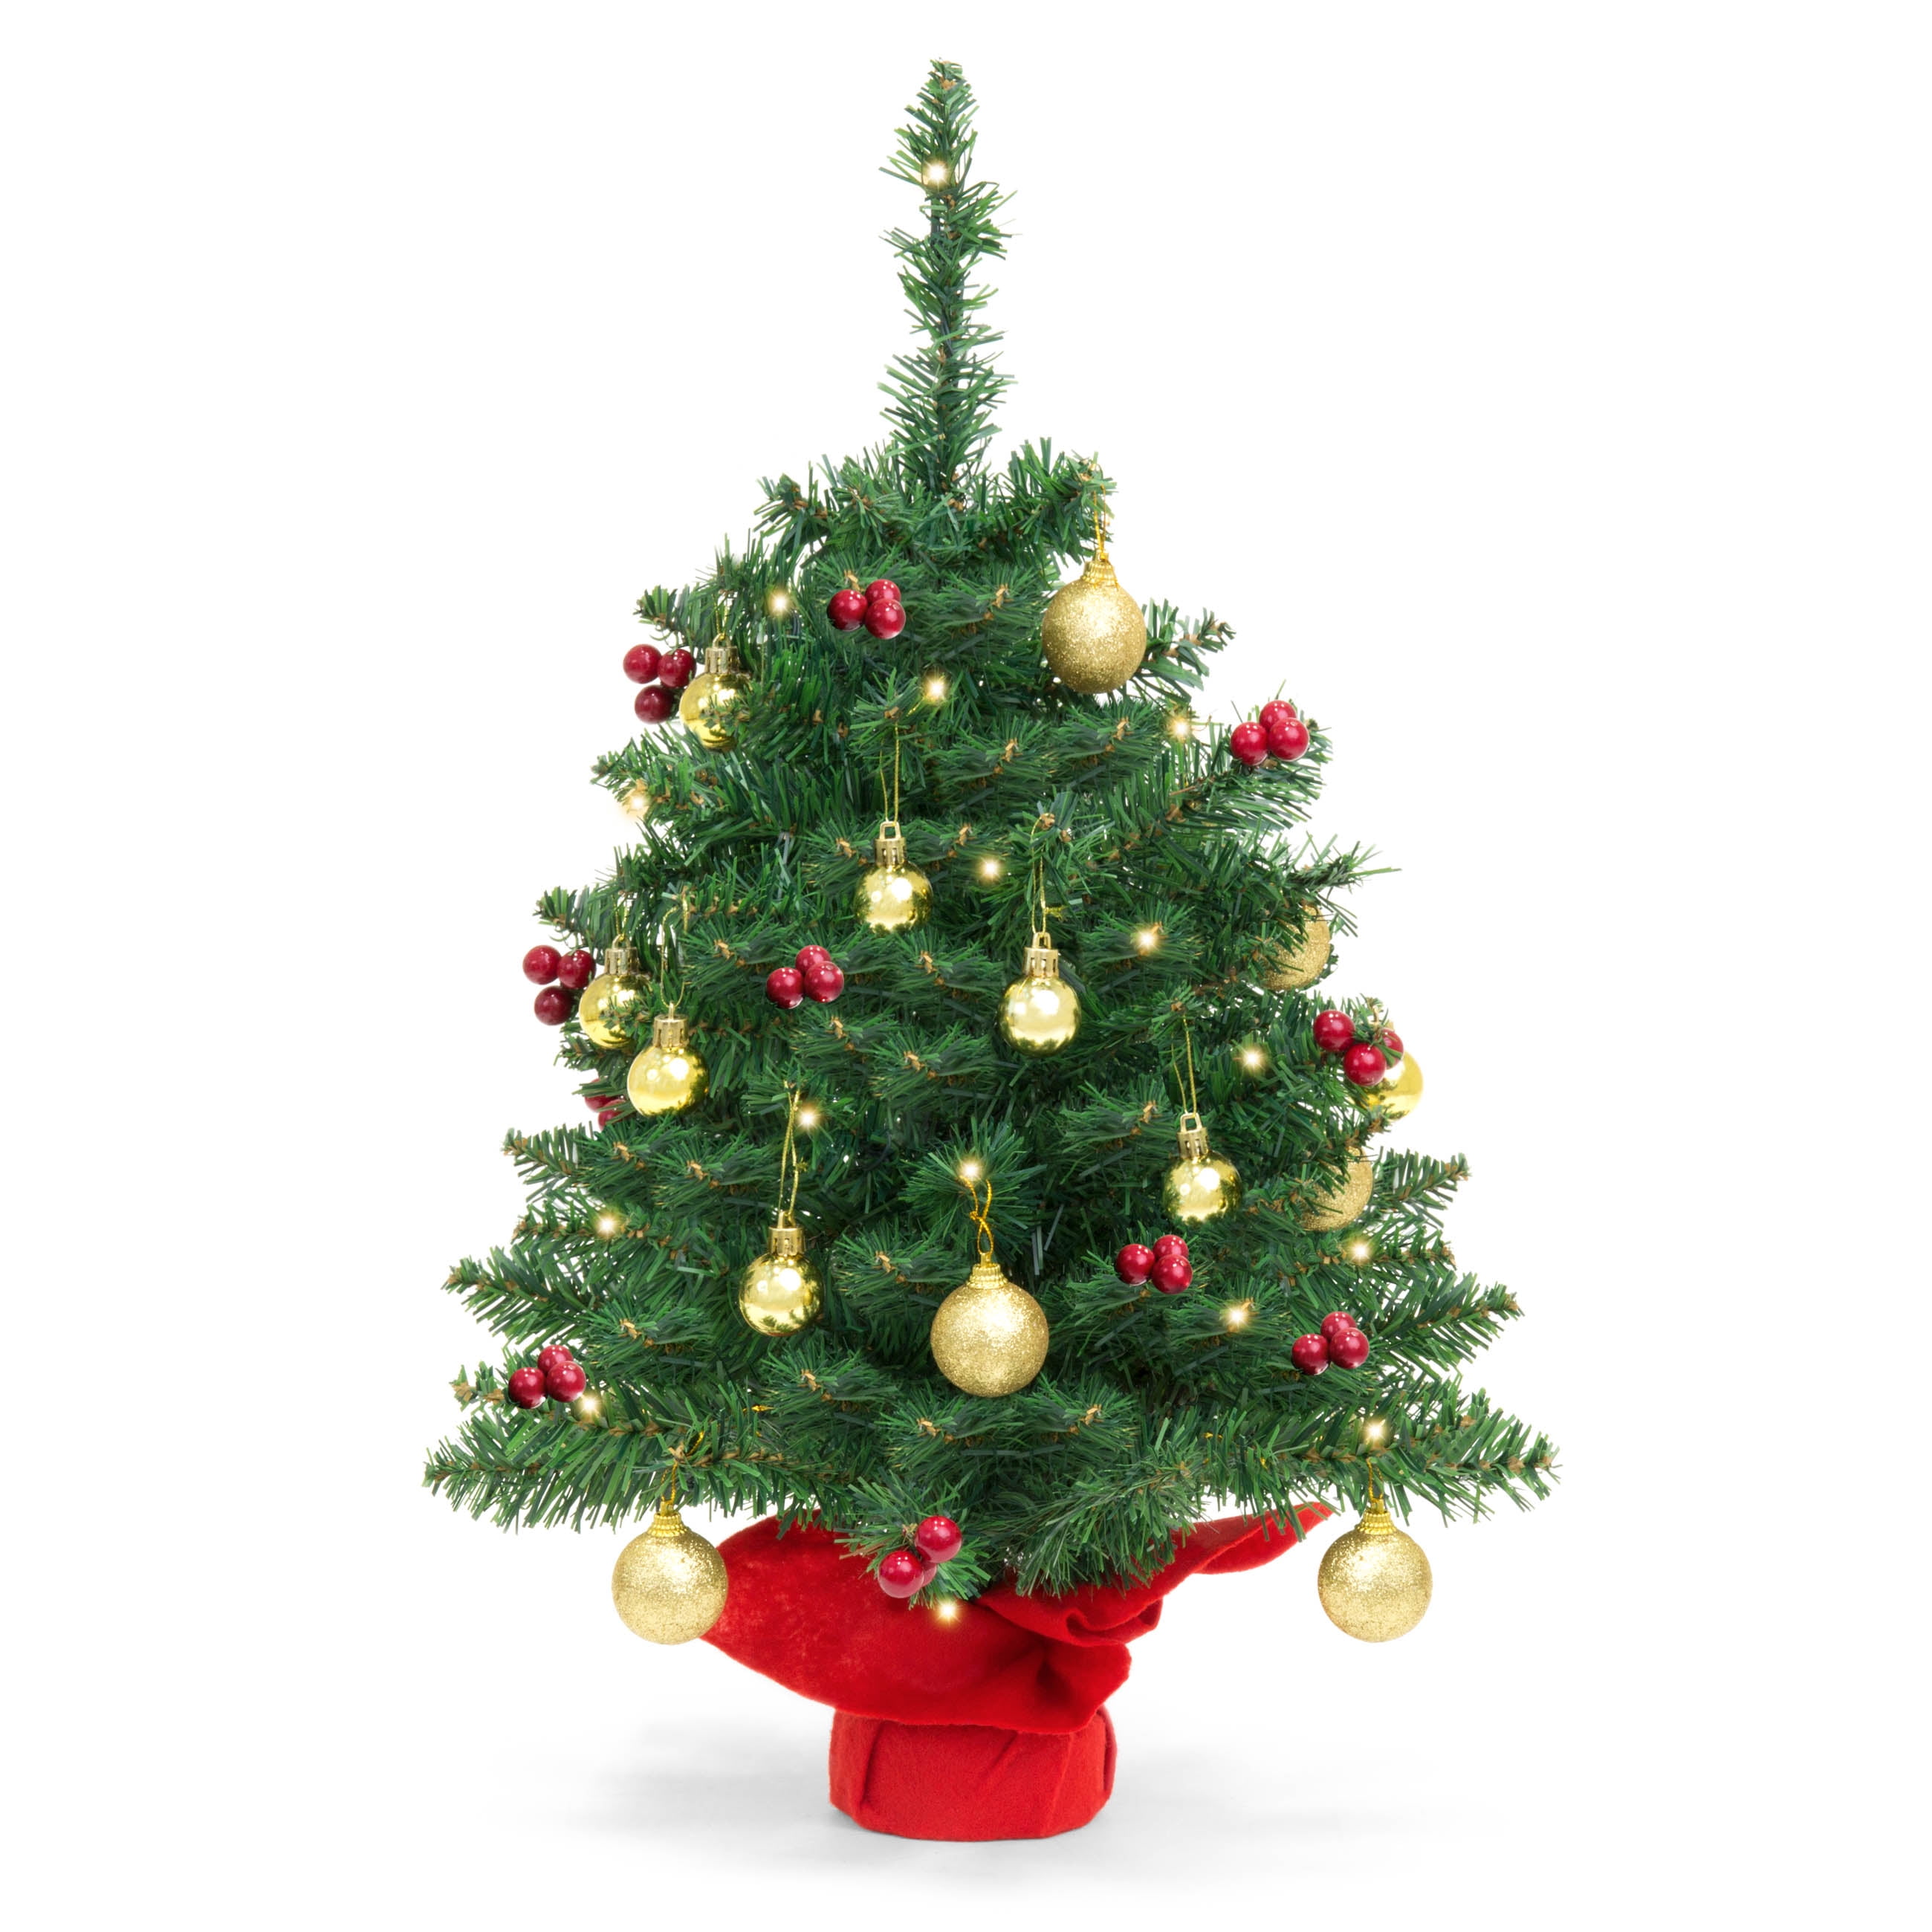 1 xtabletop Artificial Small Mini Christmas Trees with LED Lights Ornaments DIY 